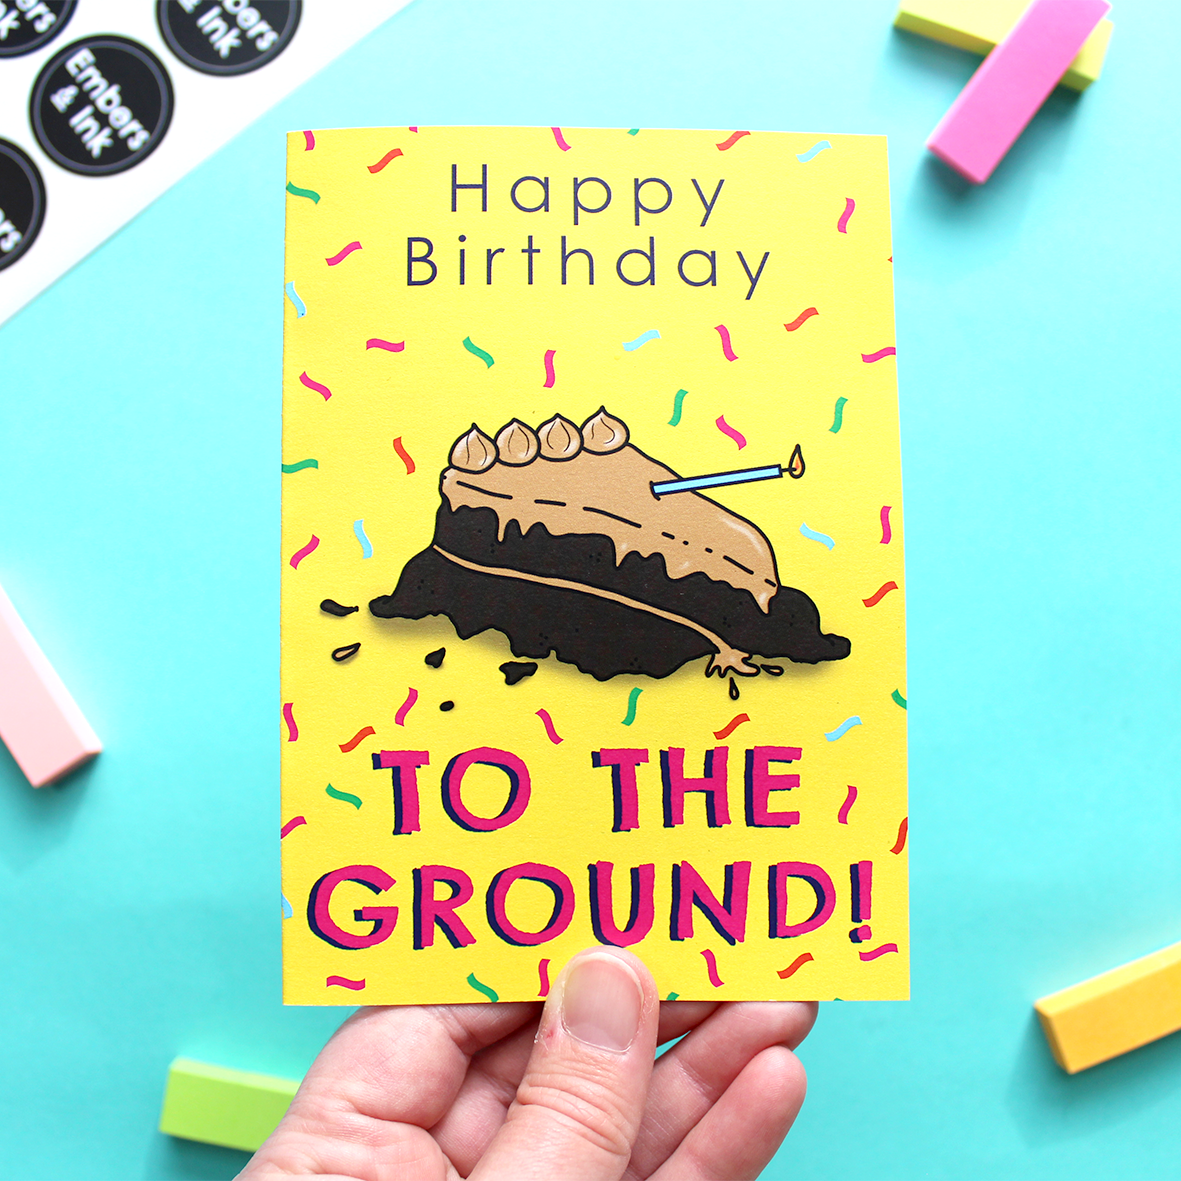 A hand holds the card which shows an illustration of a cake that's been thrown on the ground. We know this because the words on the card say 'Happy Birthday TO THE GROUND!'. It's taken from a song by The Lonely Island. The background of the card is yellow with multicoloured confetti 